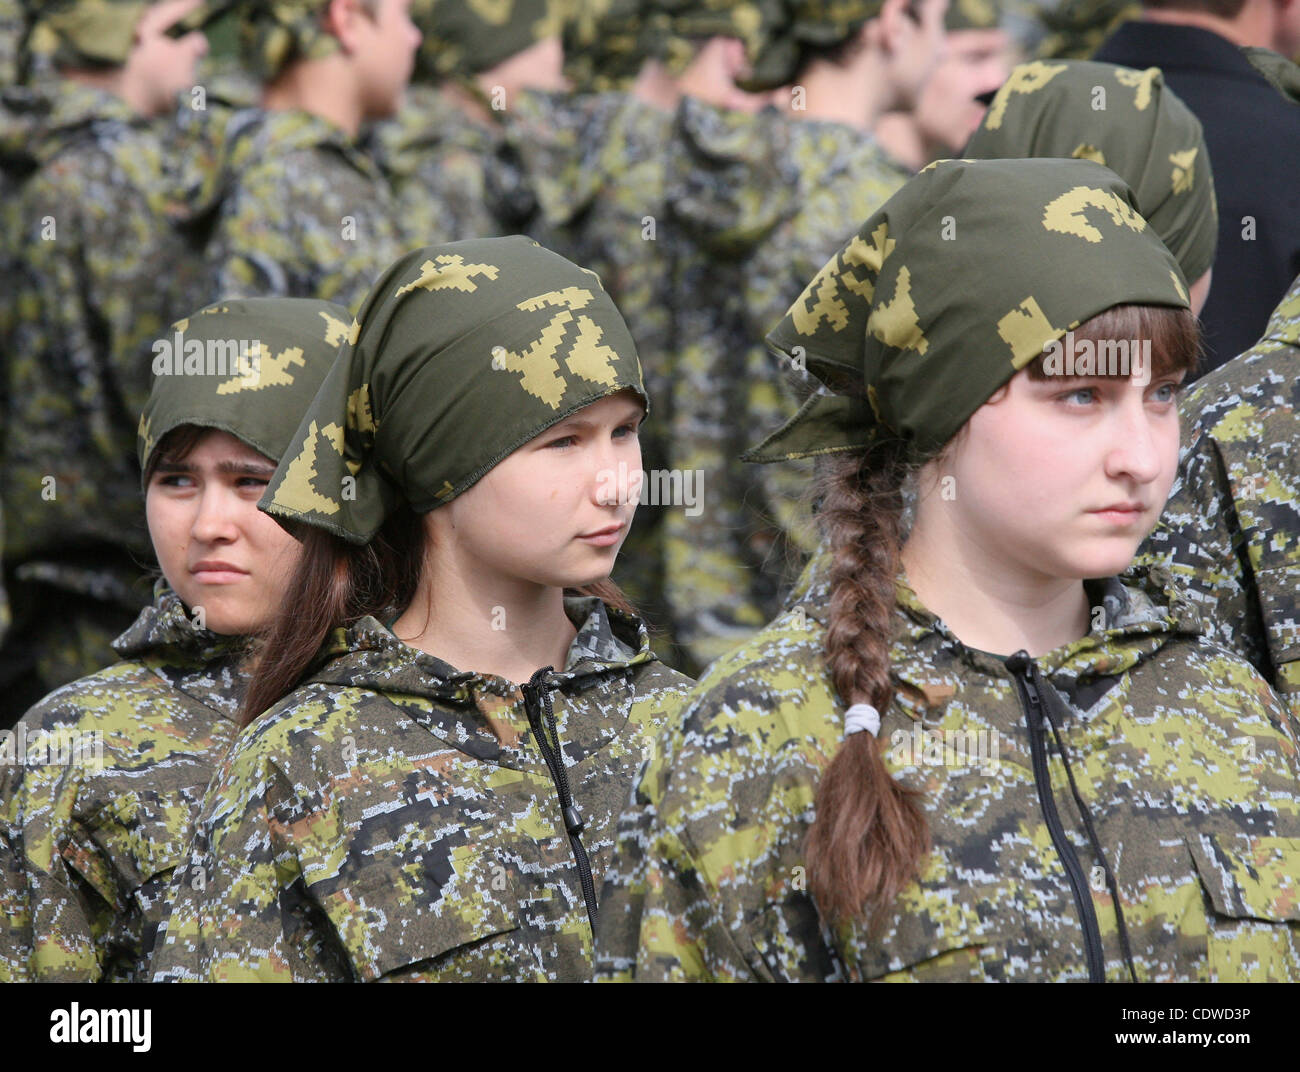 Russian teenagers are getting military skills during the summer training camp Zarnitsa for teenages organized by military-patriotic club.The event is taking place at the military base of 27th Rifle-infantry division near Moscow. Pictured: Russian girls teenagers during military training. Stock Photo